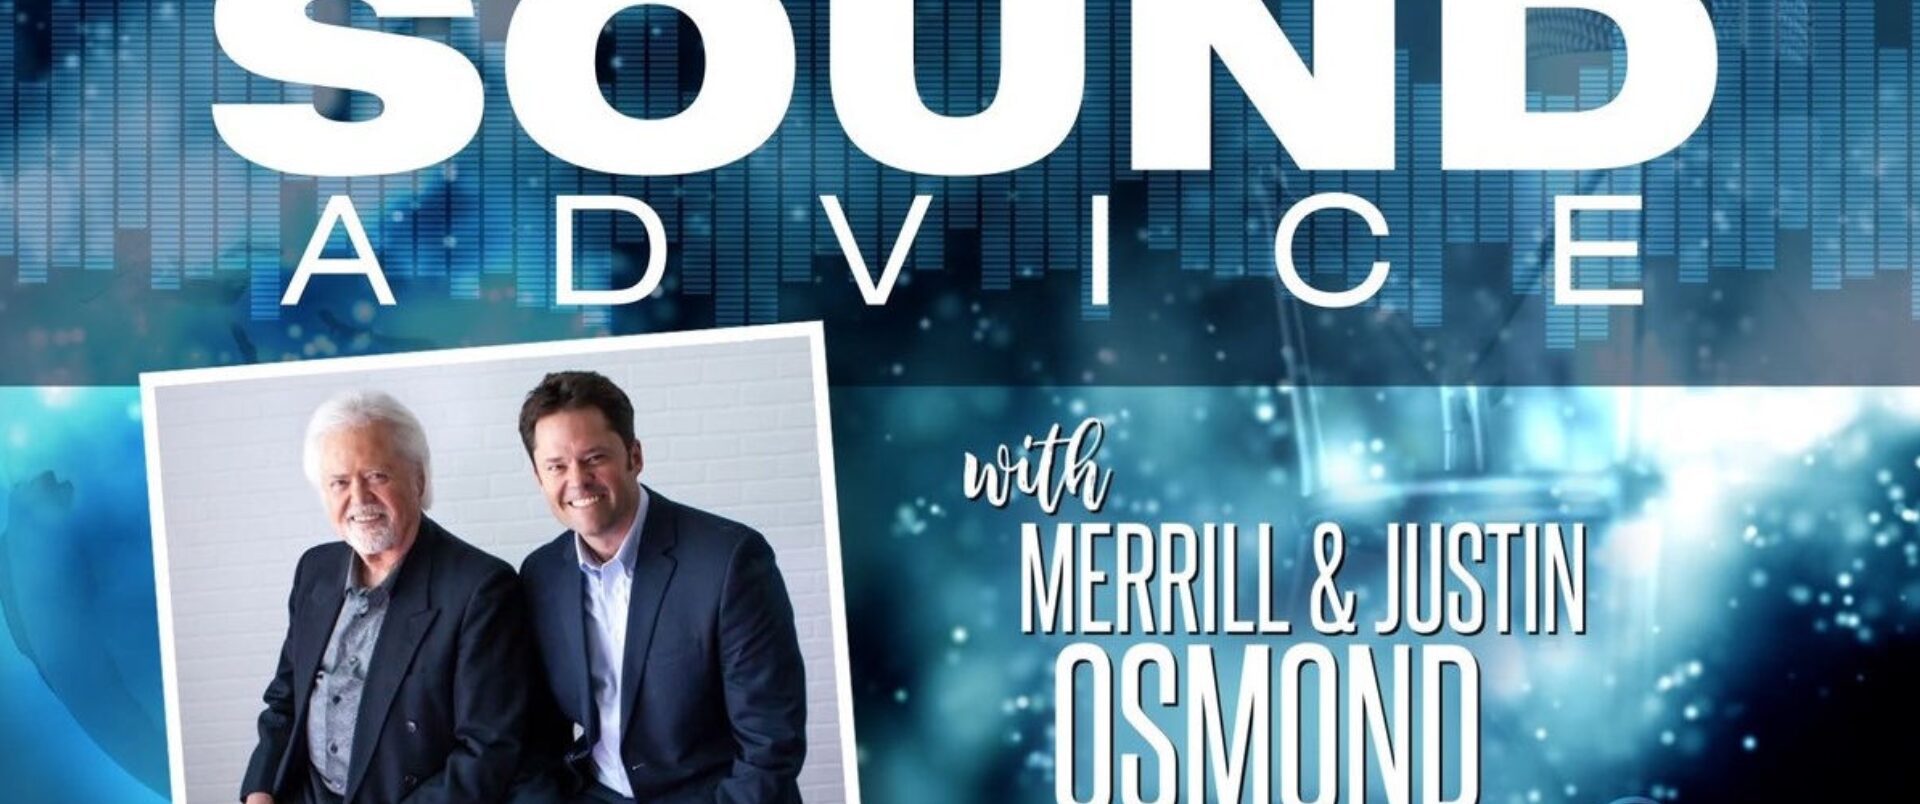 A man in suit and tie next to the words sound advice with merrill & osmond.